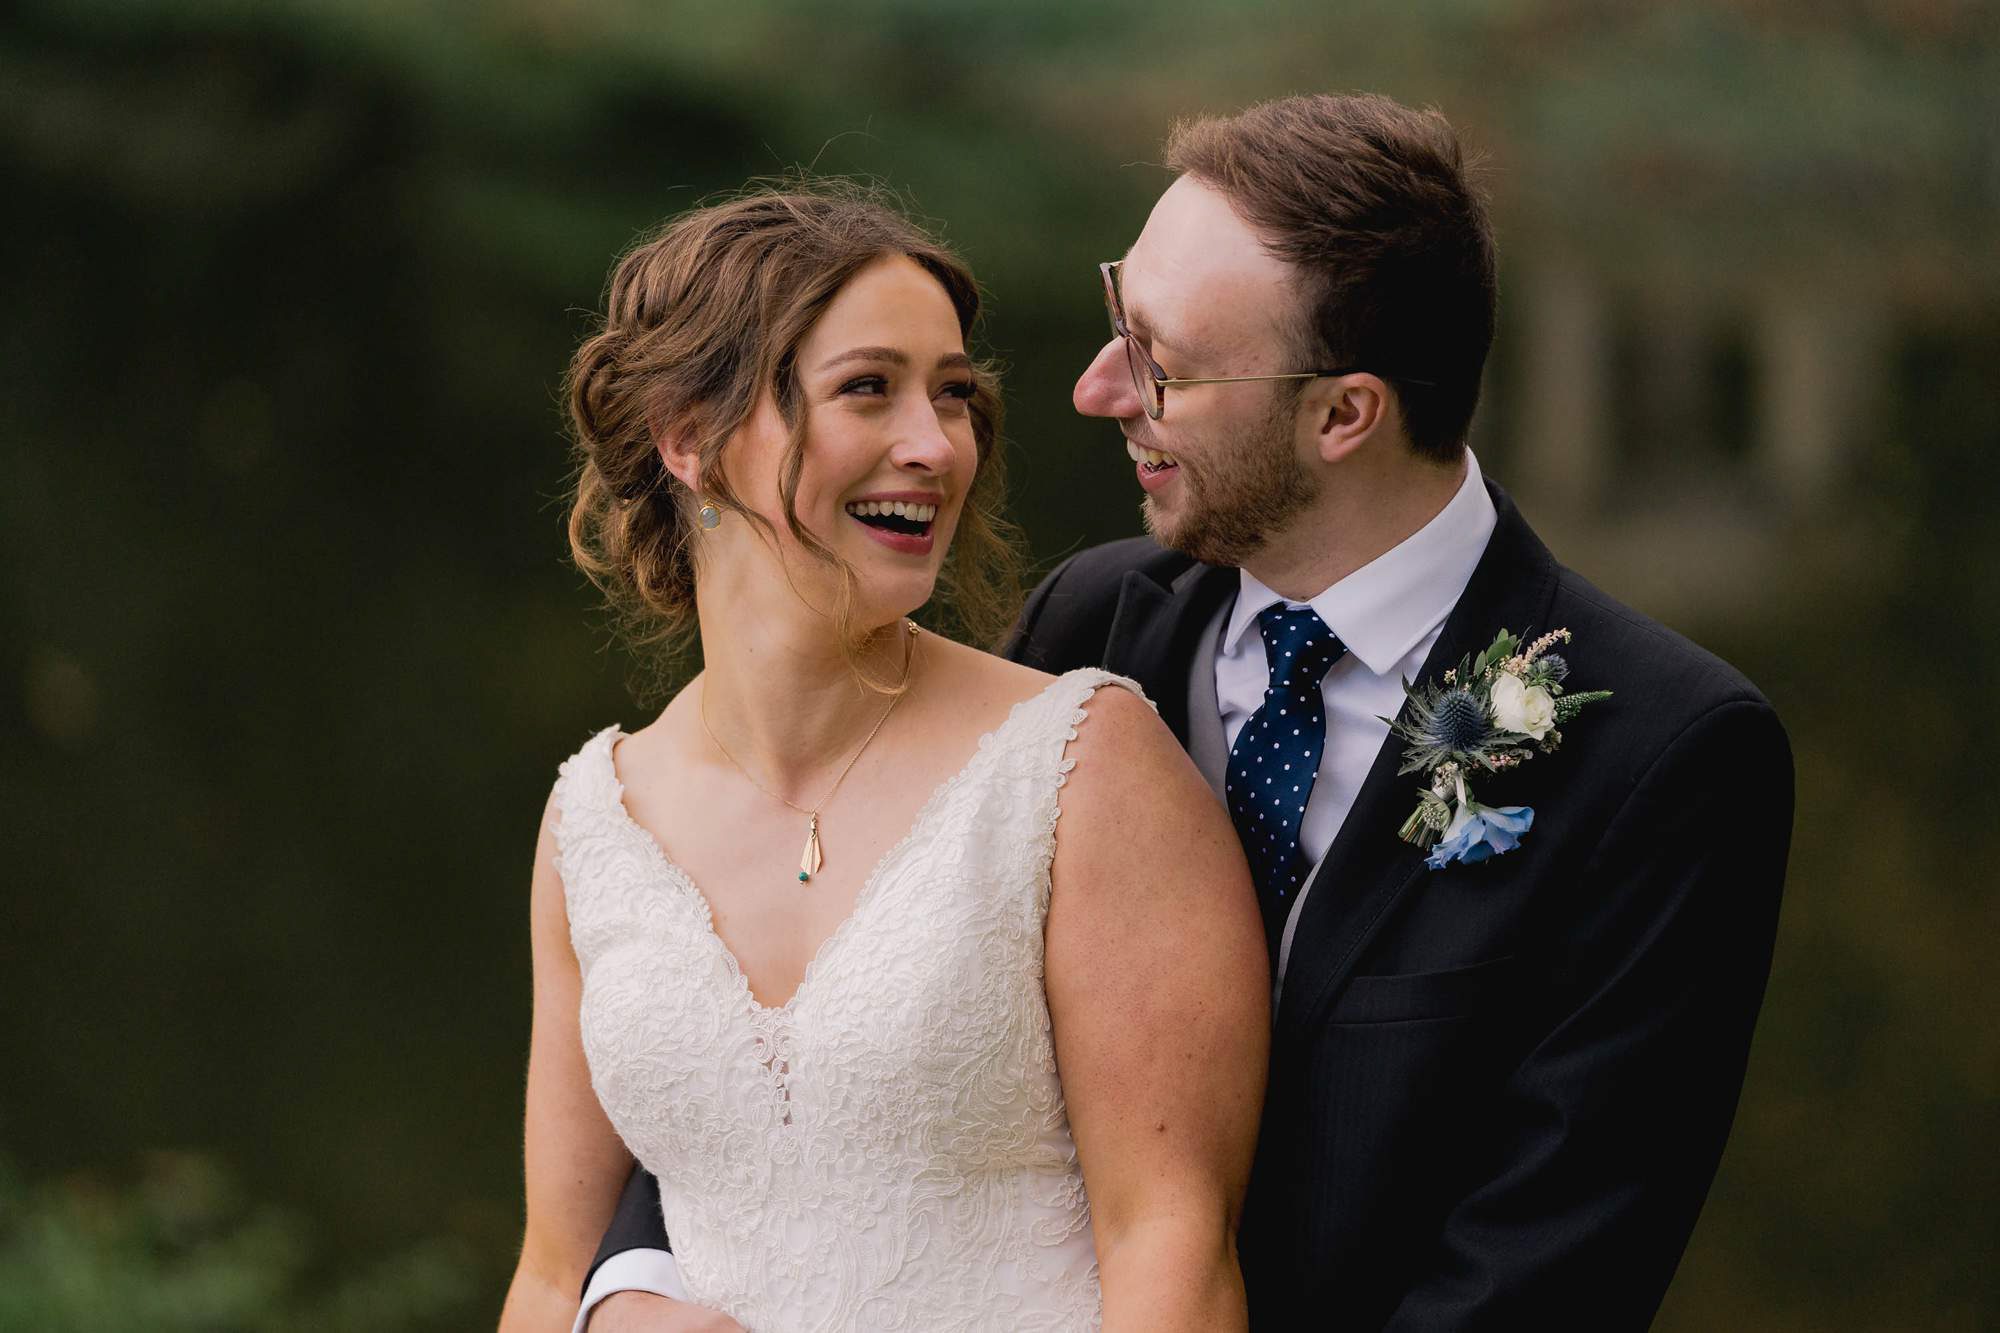 Bride and groom laugh together on their wedding day at Salomons Estate in Tunbridge Wells.